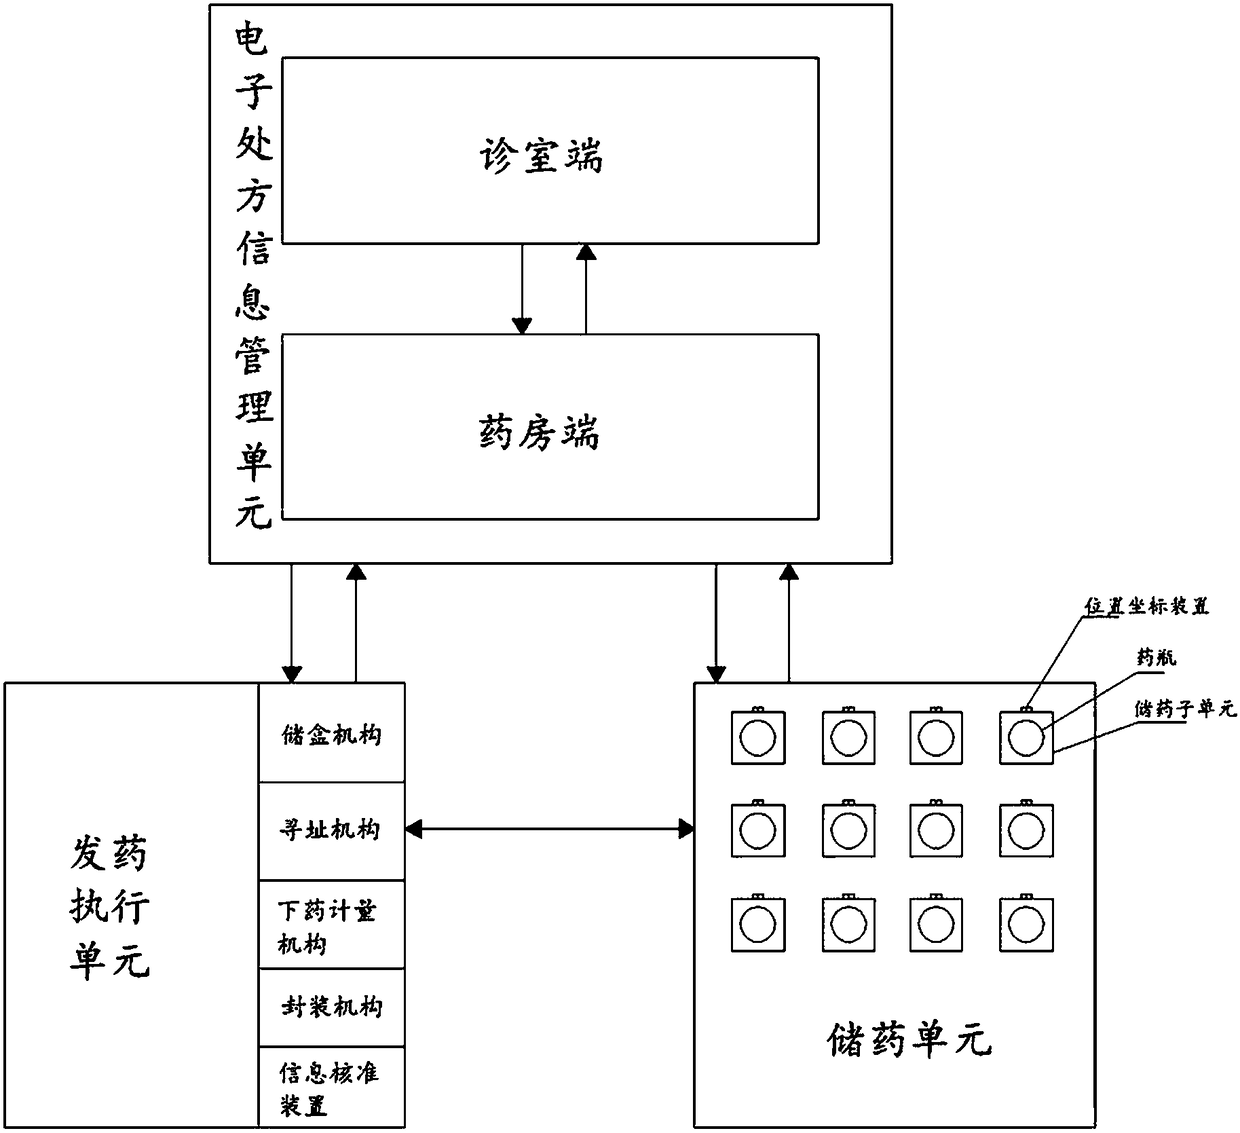 Full-automatic medicine dispensing system for traditional Chinese medicine formula granules